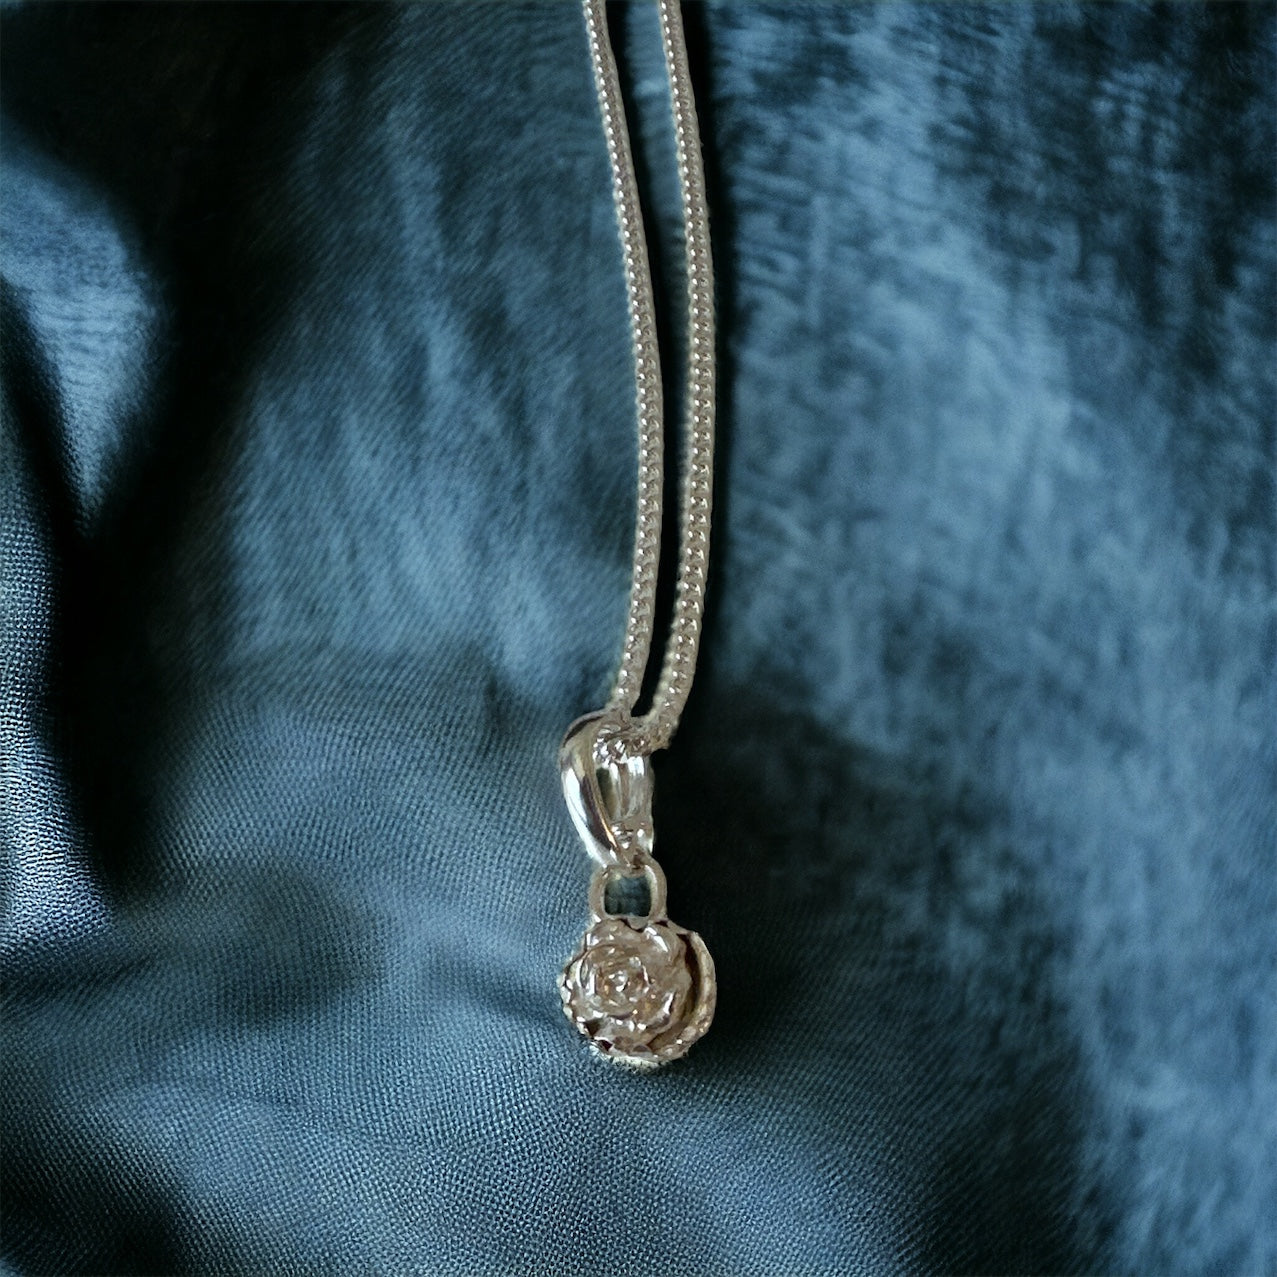 Rose Bud Pendant with 16” Argentium Silver Chain